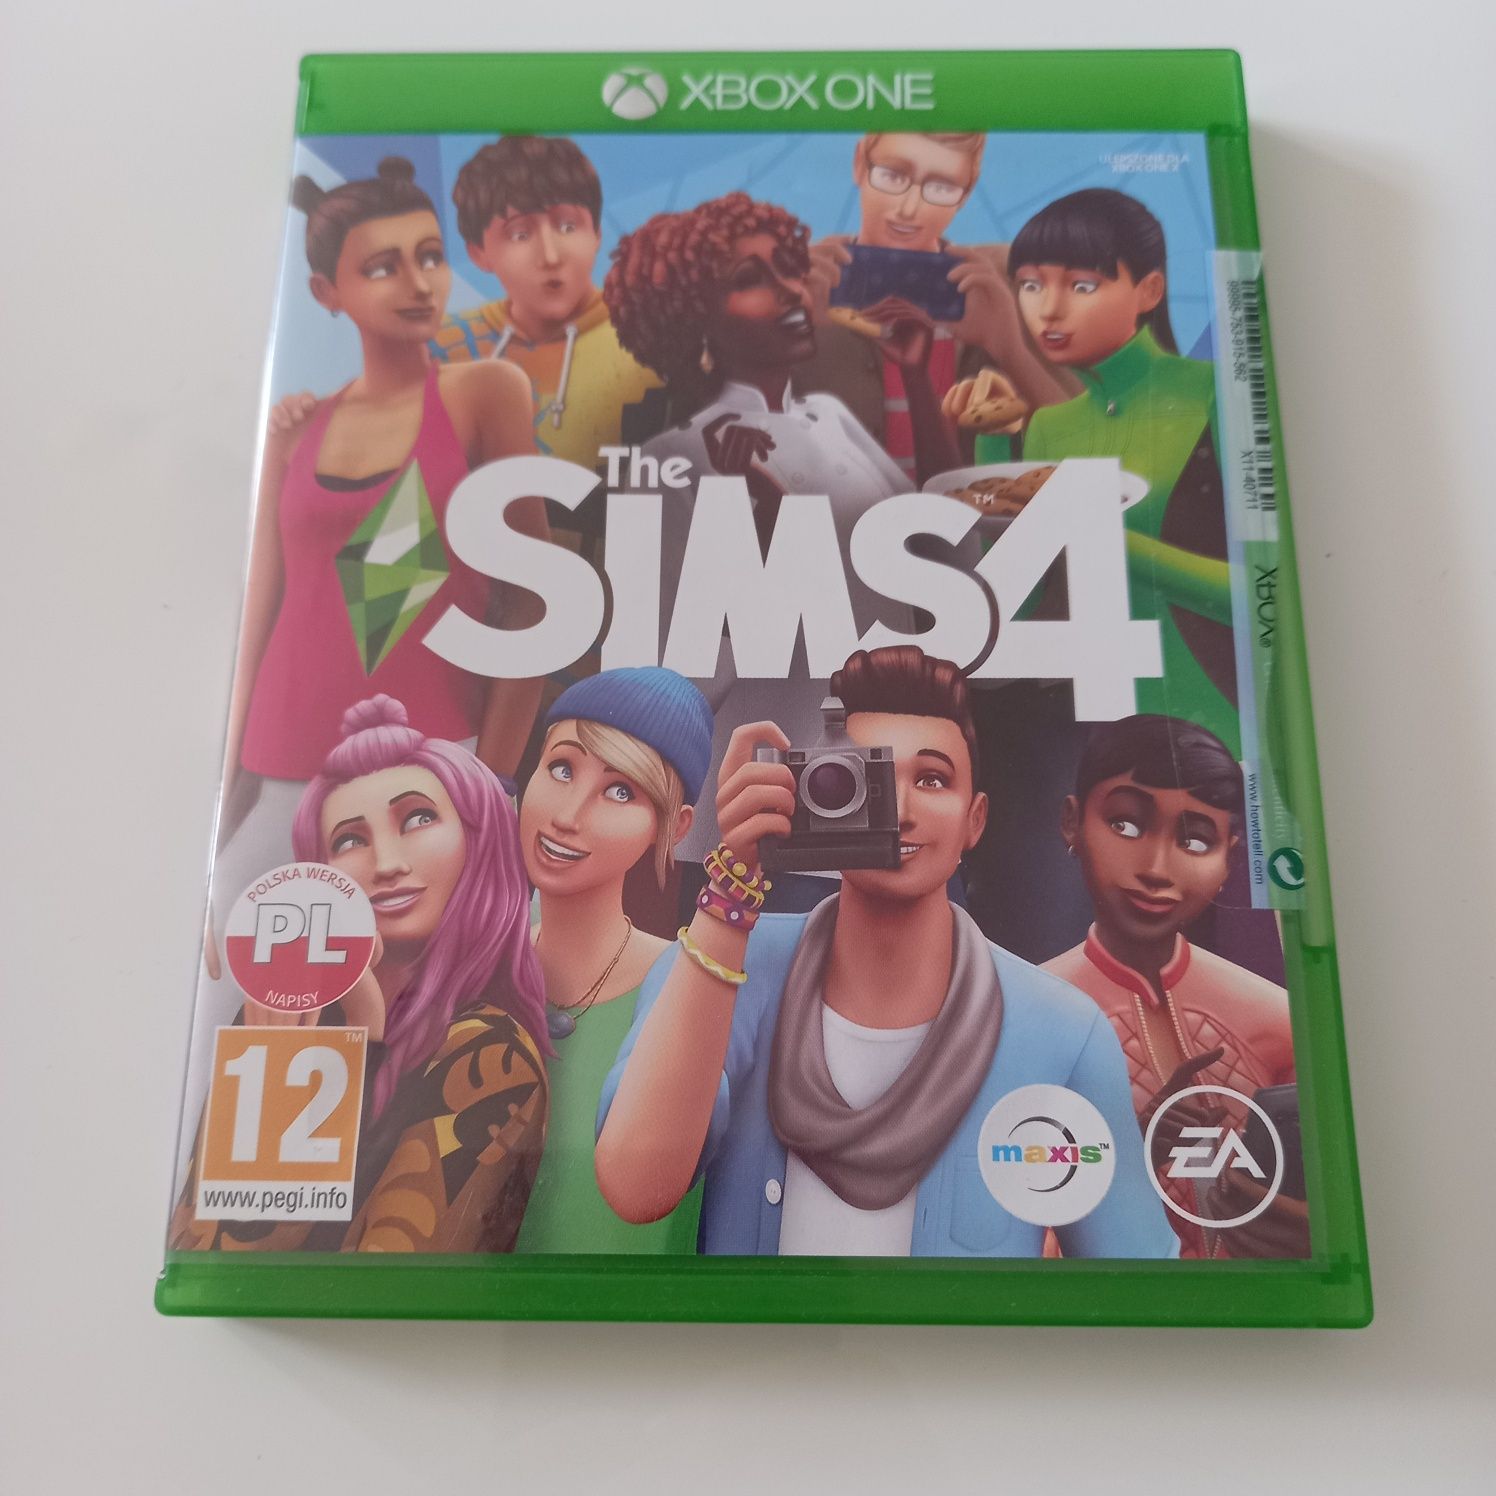 The sims4 xbox one